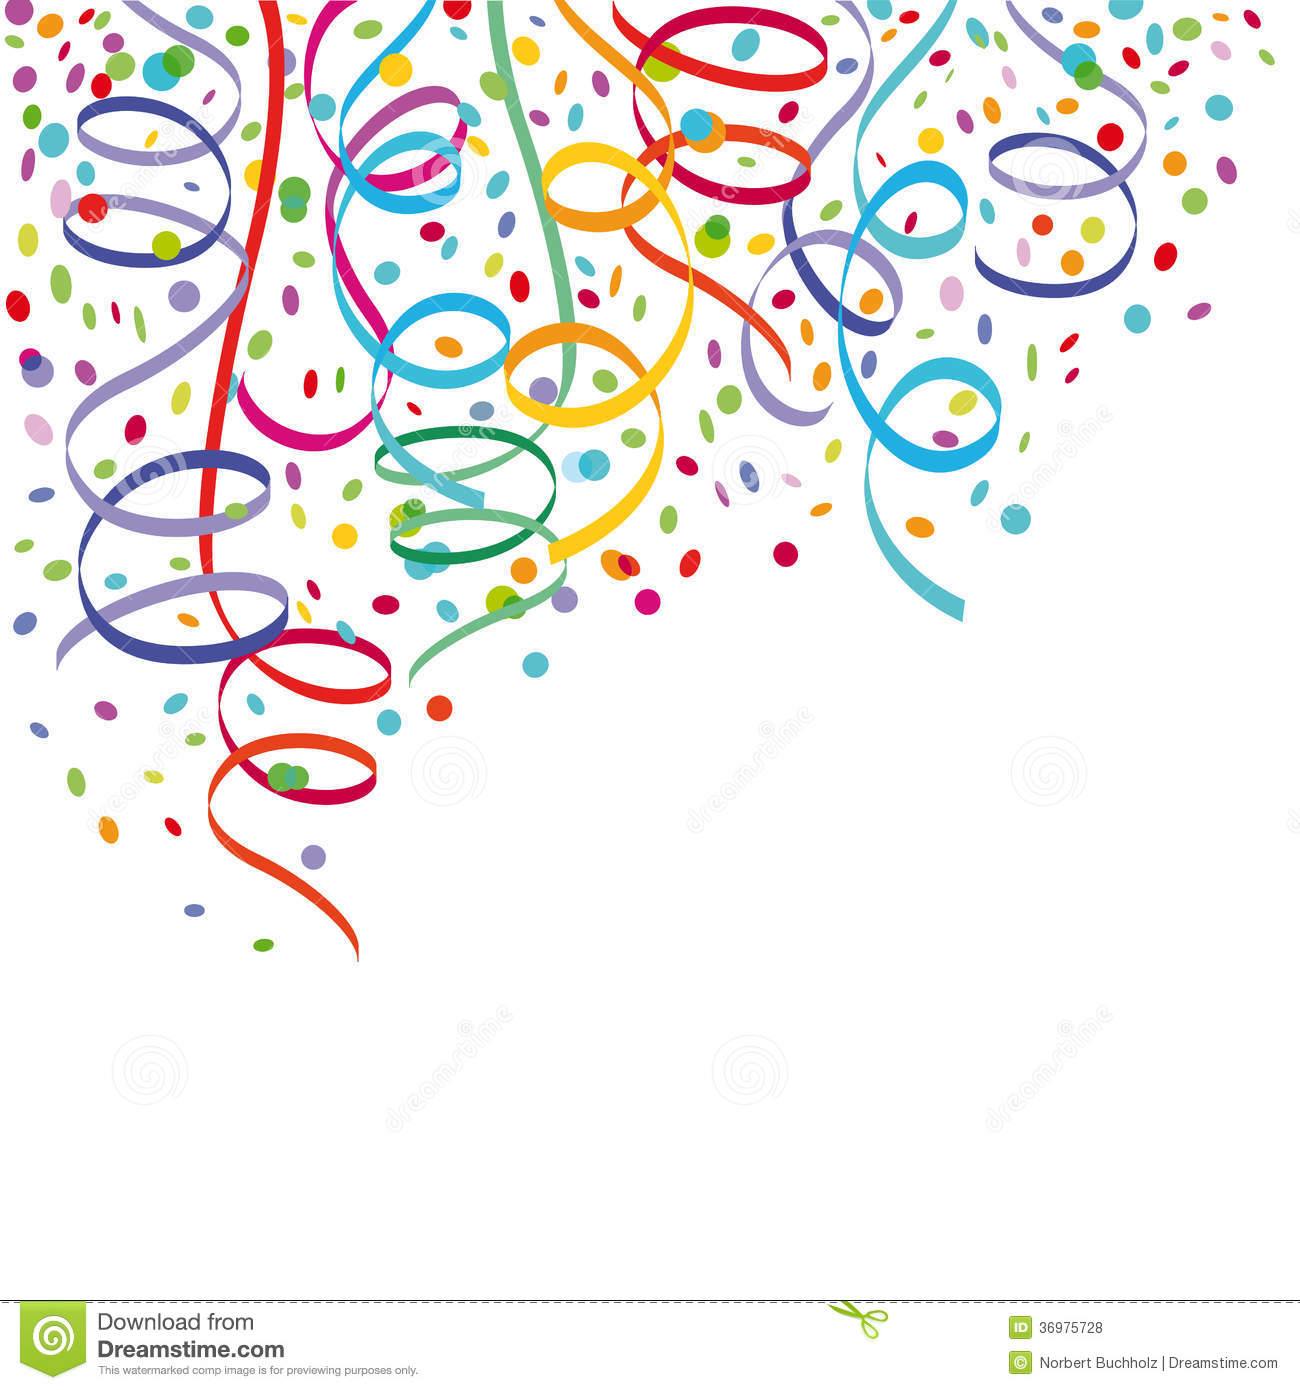 An Illustration Of Colorful Confetti And Streamers